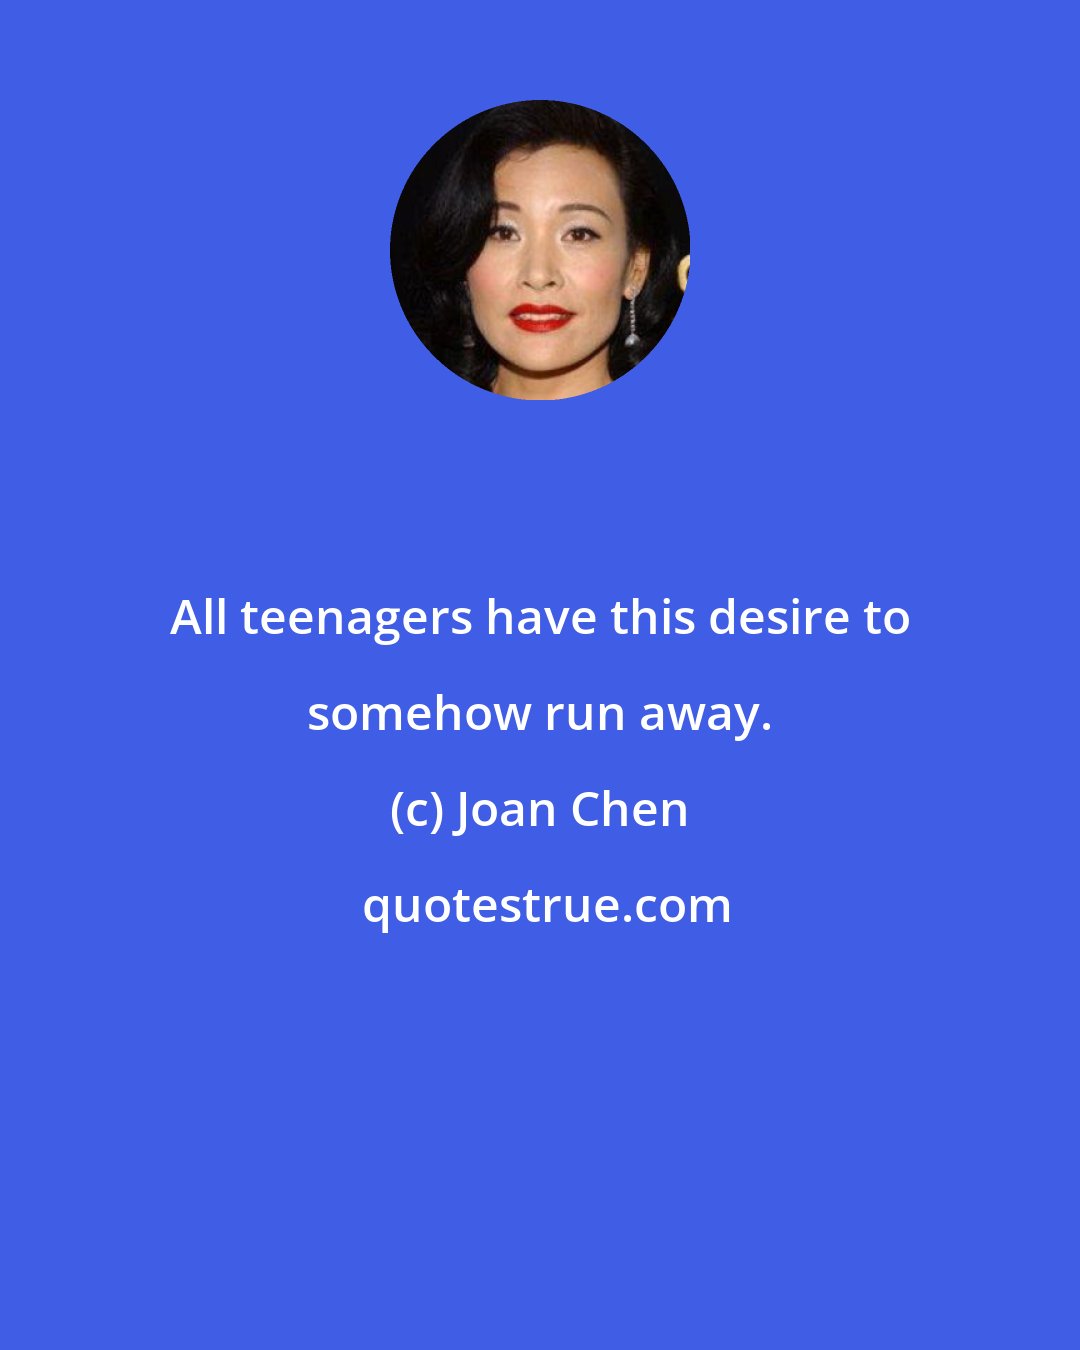 Joan Chen: All teenagers have this desire to somehow run away.